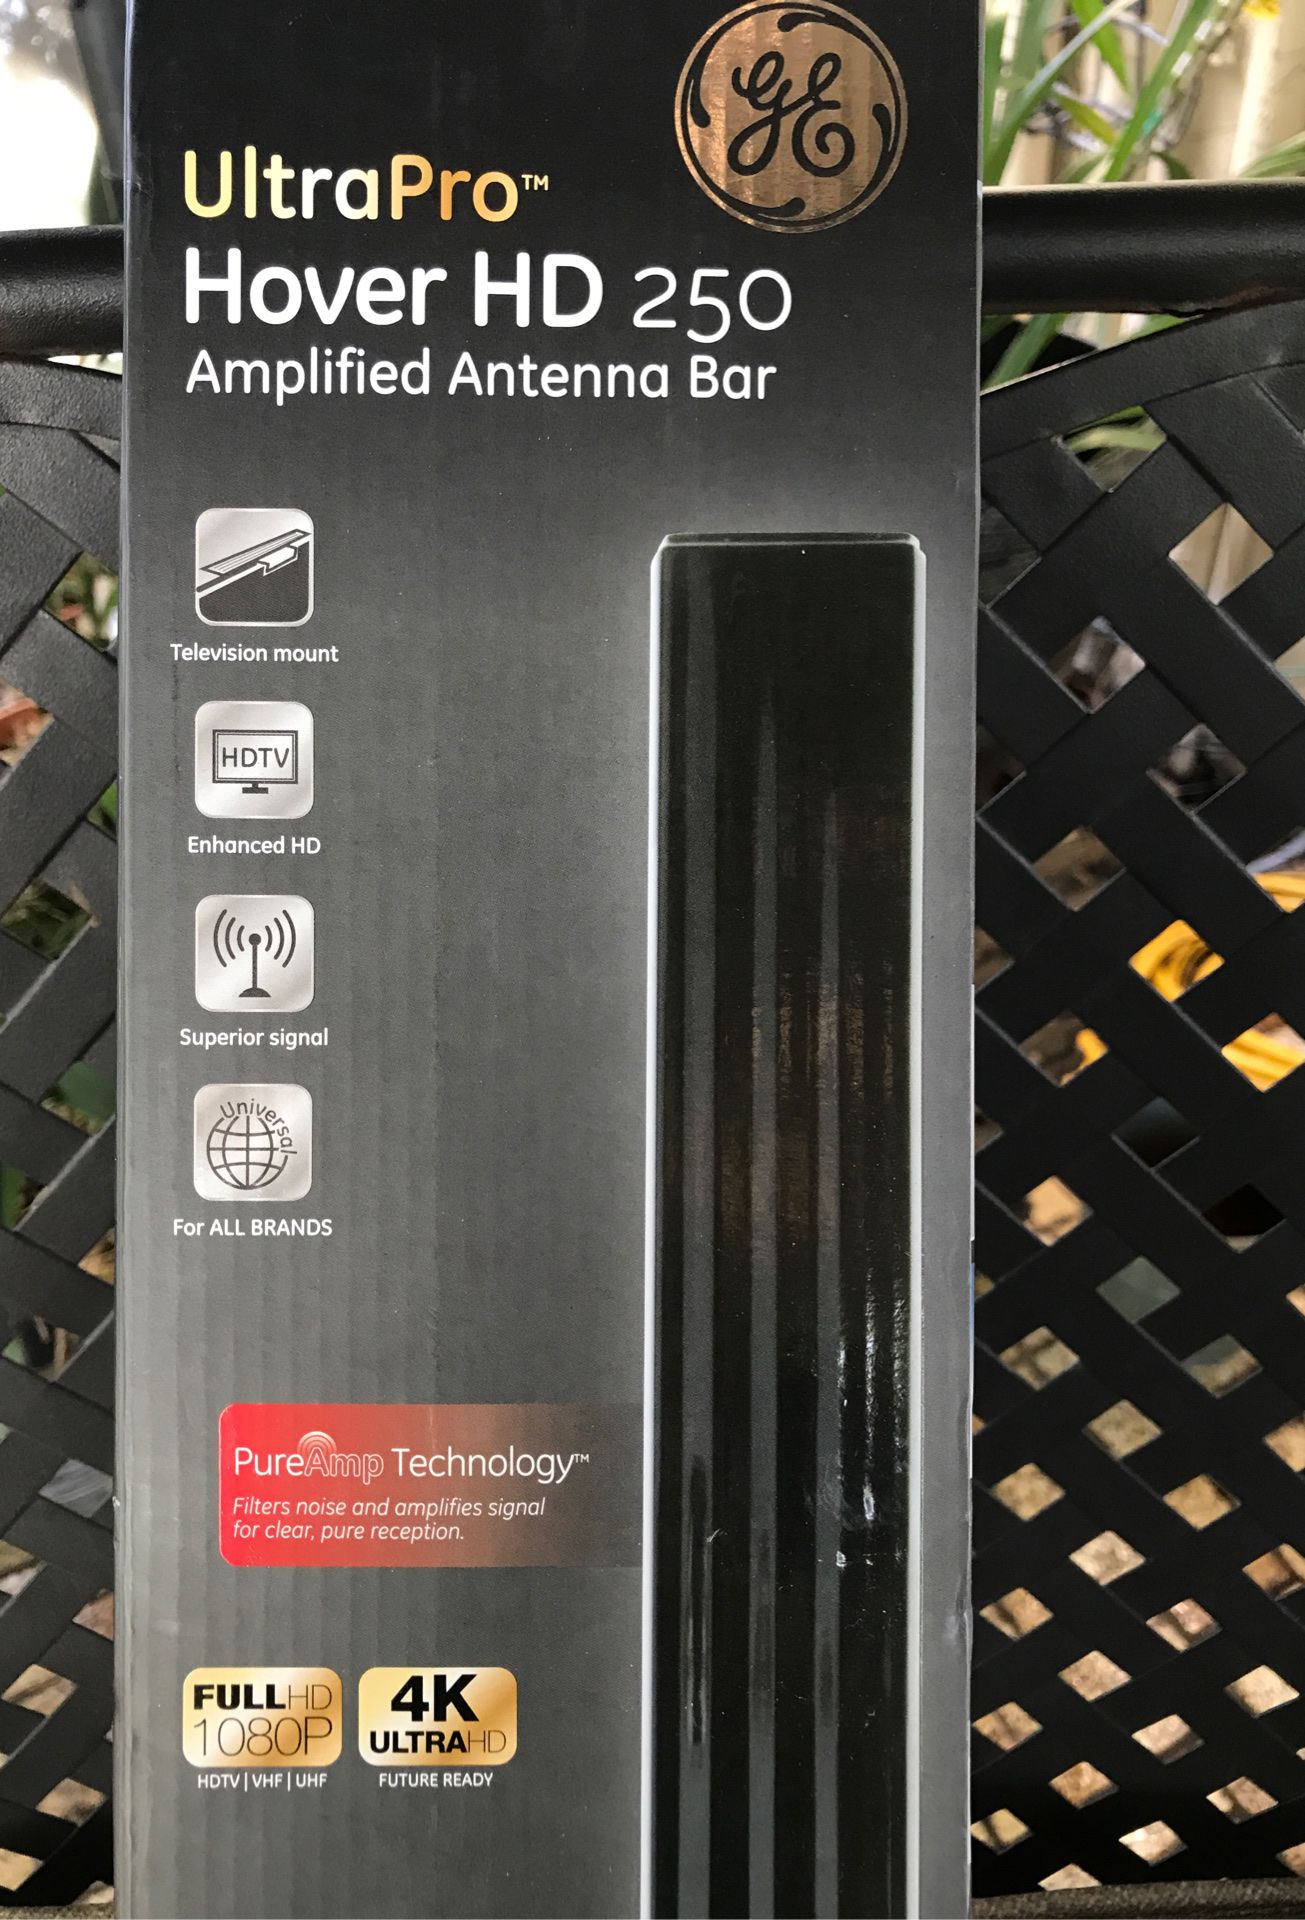 Antenna for Free Hd TV!!! Amplified Antenna Bar 4K Ultra HDTV EASY TO MOUNT ANYWHERE 50 miles range